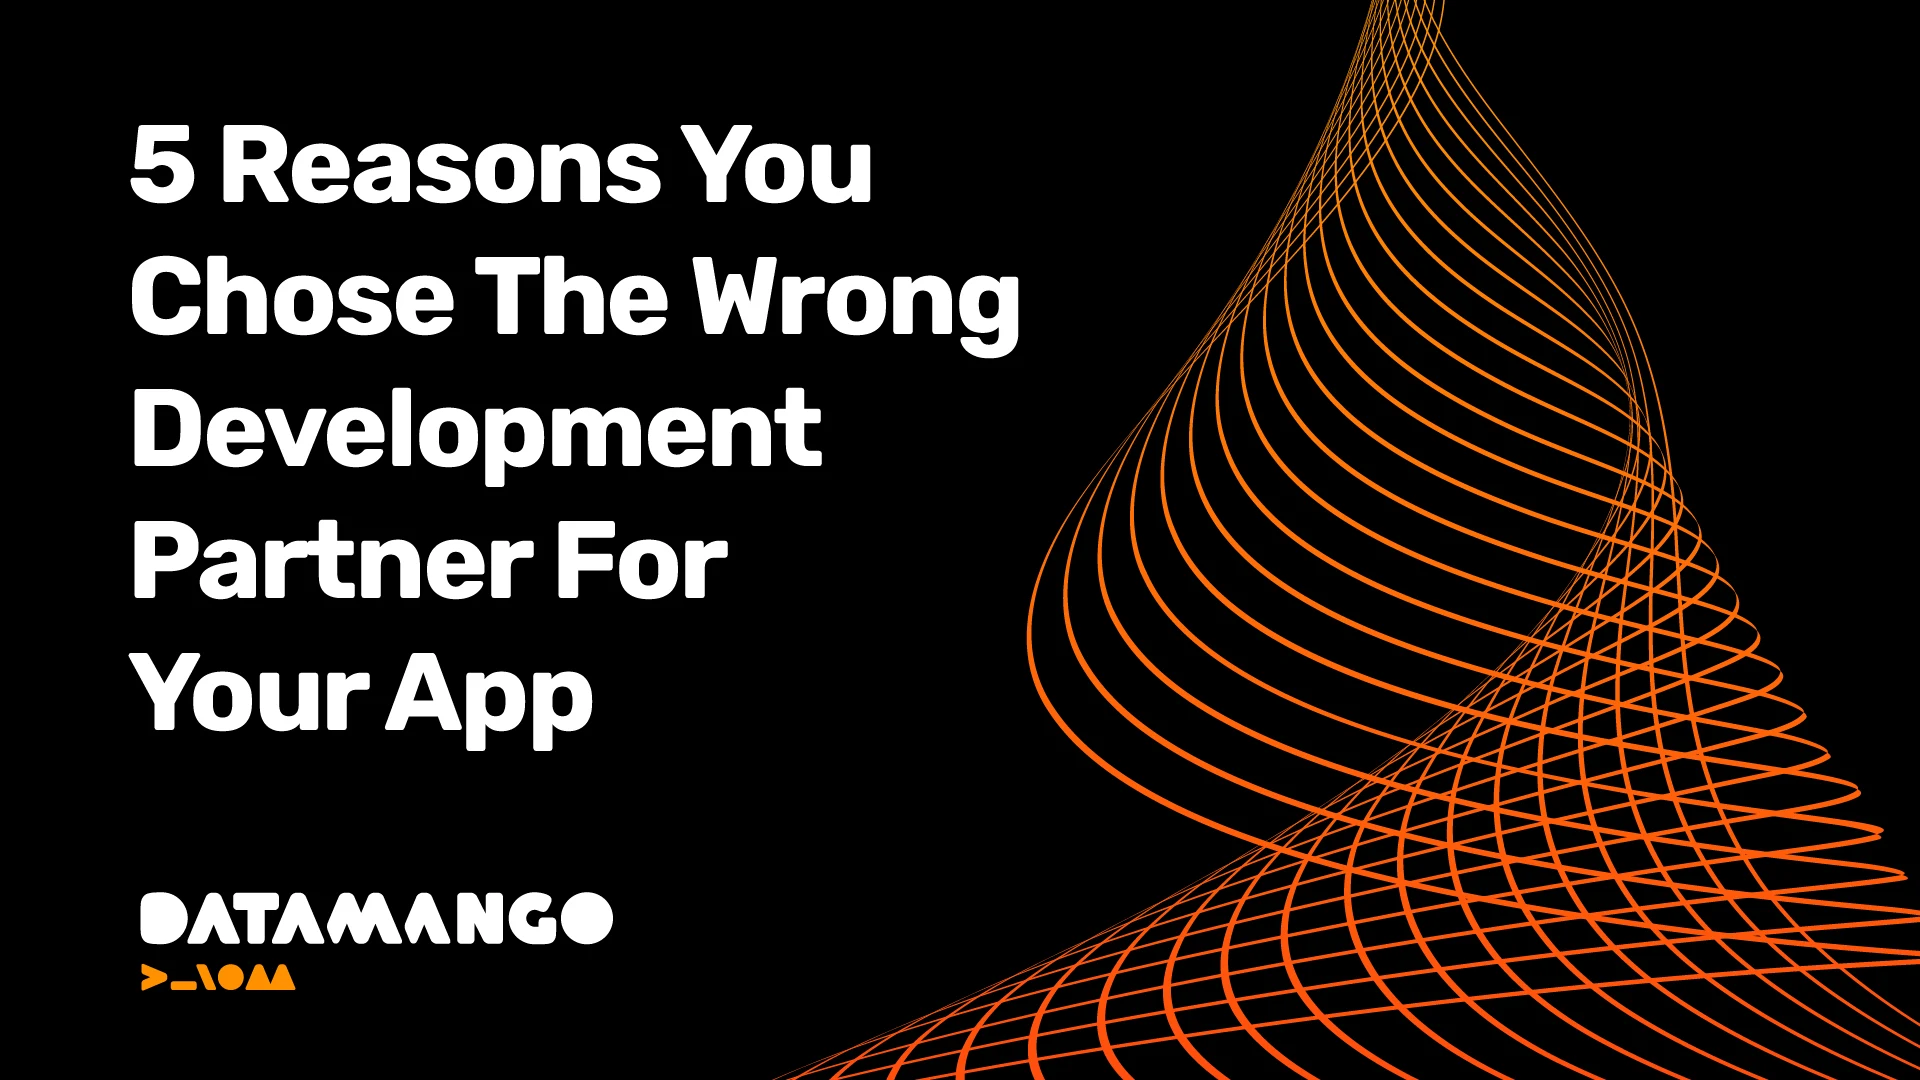 datamango-5-reasons-you-chose-the-wrong-development-partner-for-your-app